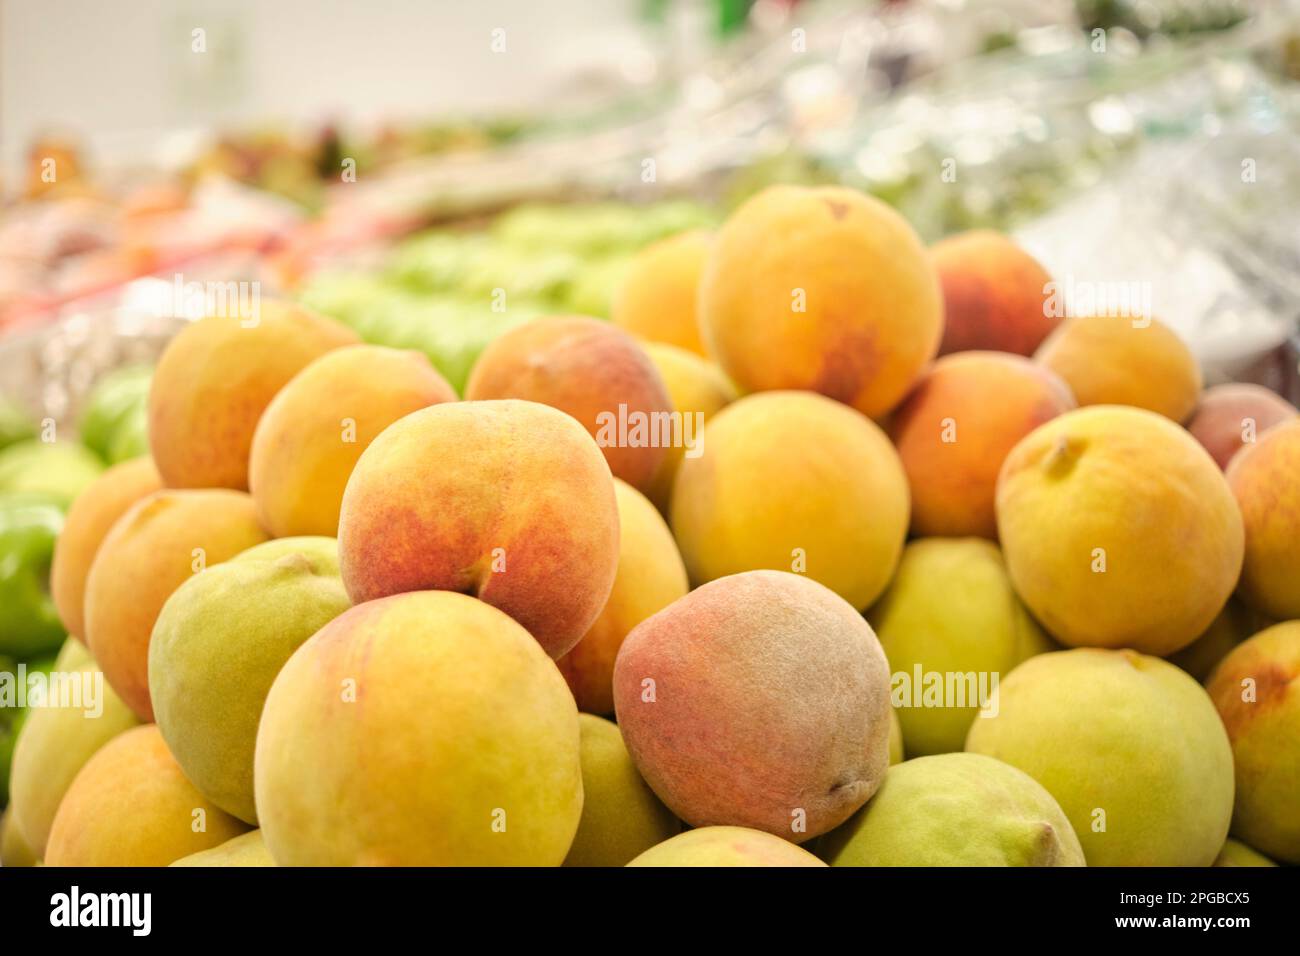 Stack of peaches in a fruit store. Bright image with copy space. Stock Photo